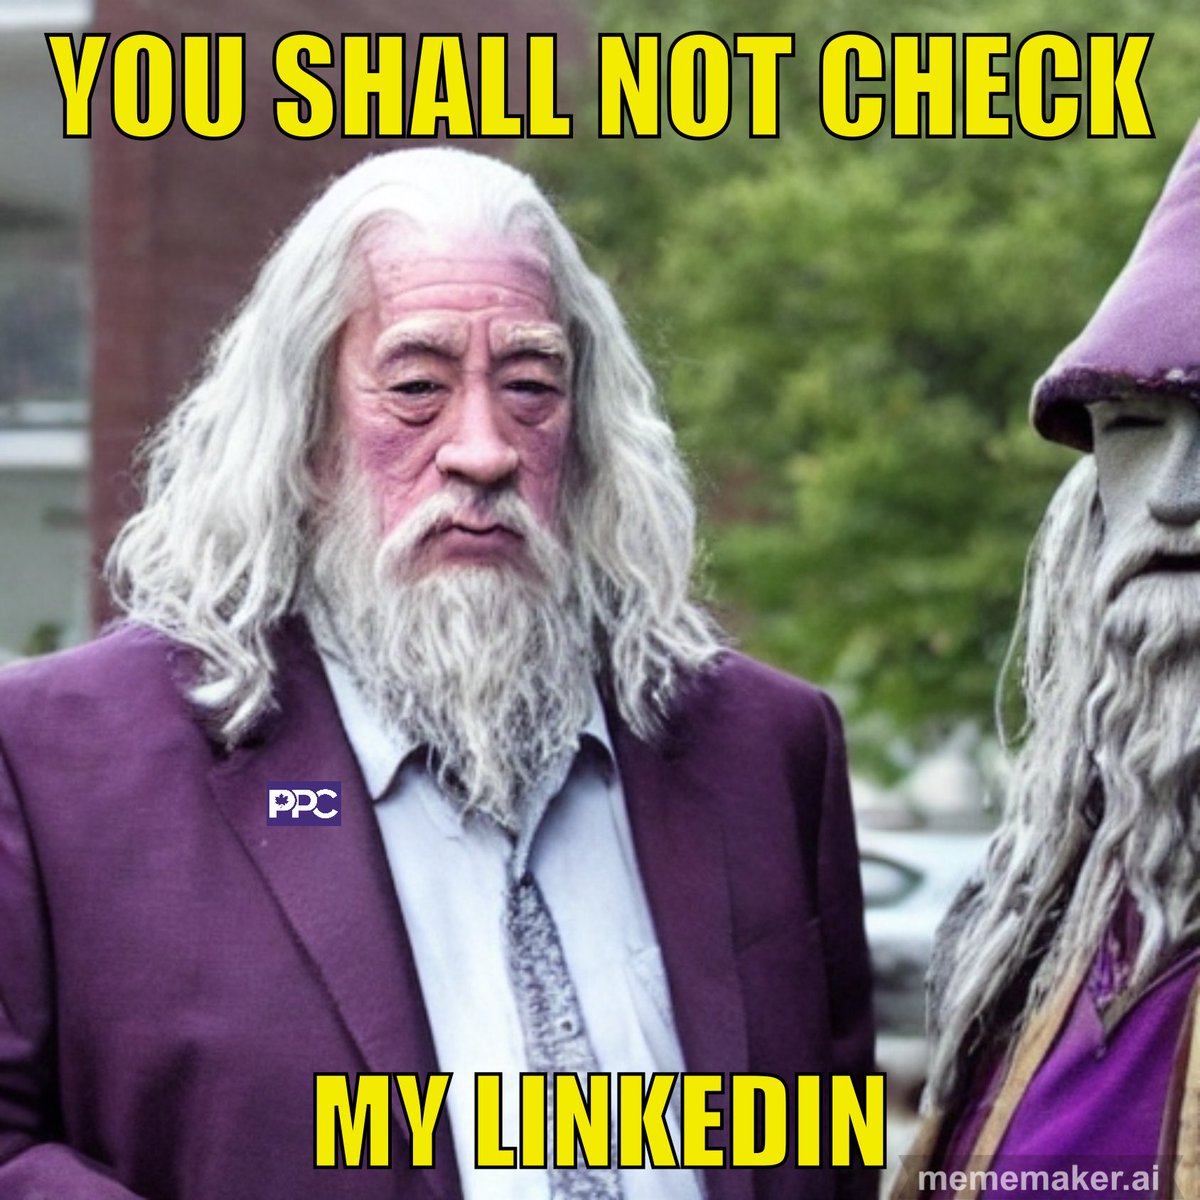 FYI @rrockdurham I hear PPC really needs candidates

Contact @TransSplendor for details, be warned vetting includes deep knowledge on lord of the rings, the matrix and Star Wars.

@DavidYeo may also have some tips.